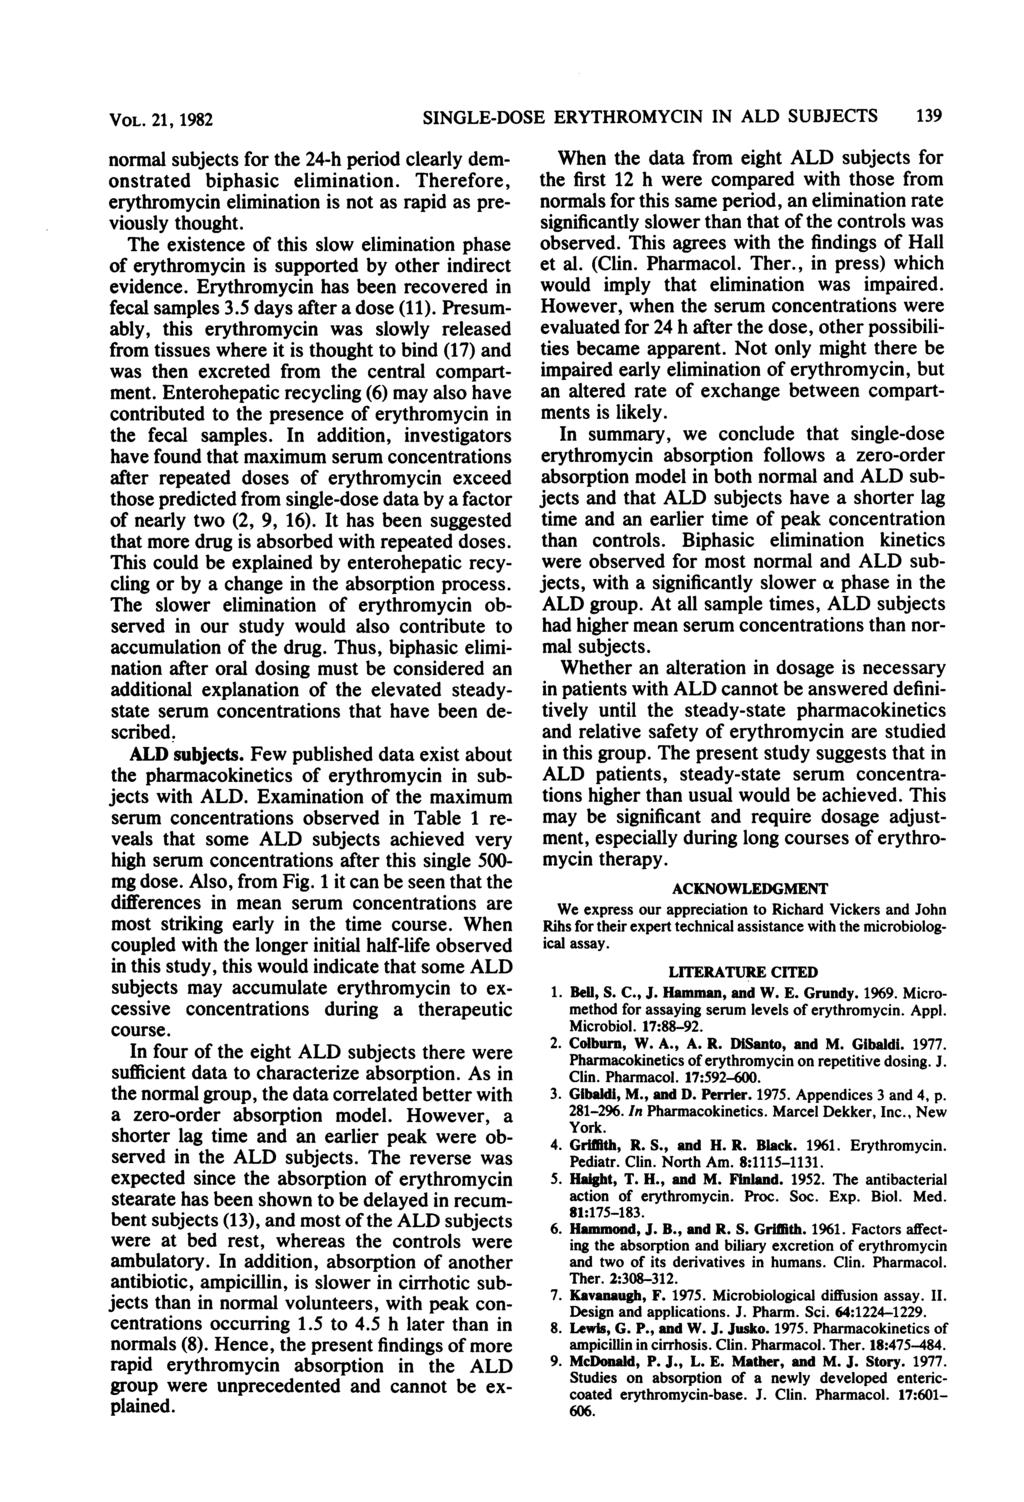 VOL. 21, 1982 normal subjects for the 24-h period clearly demonstrated biphasic elimination. Therefore, erythromycin elimination is not as rapid as previously thought.